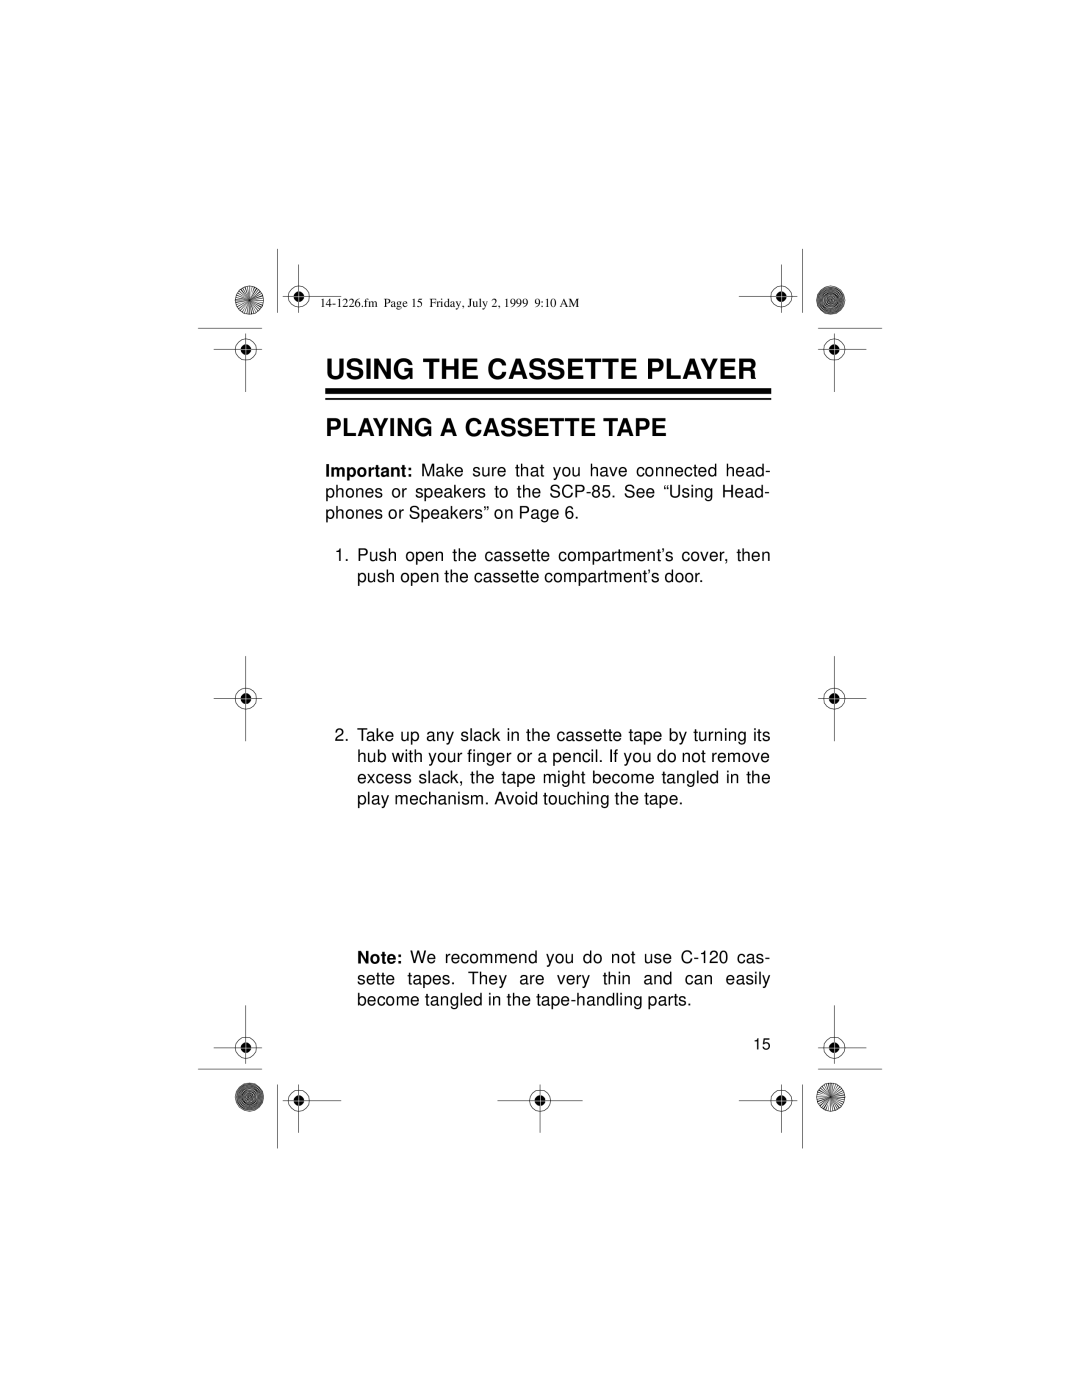 Optimus SCP-85 owner manual Using The Cassette Player, Playing A Cassette Tape 